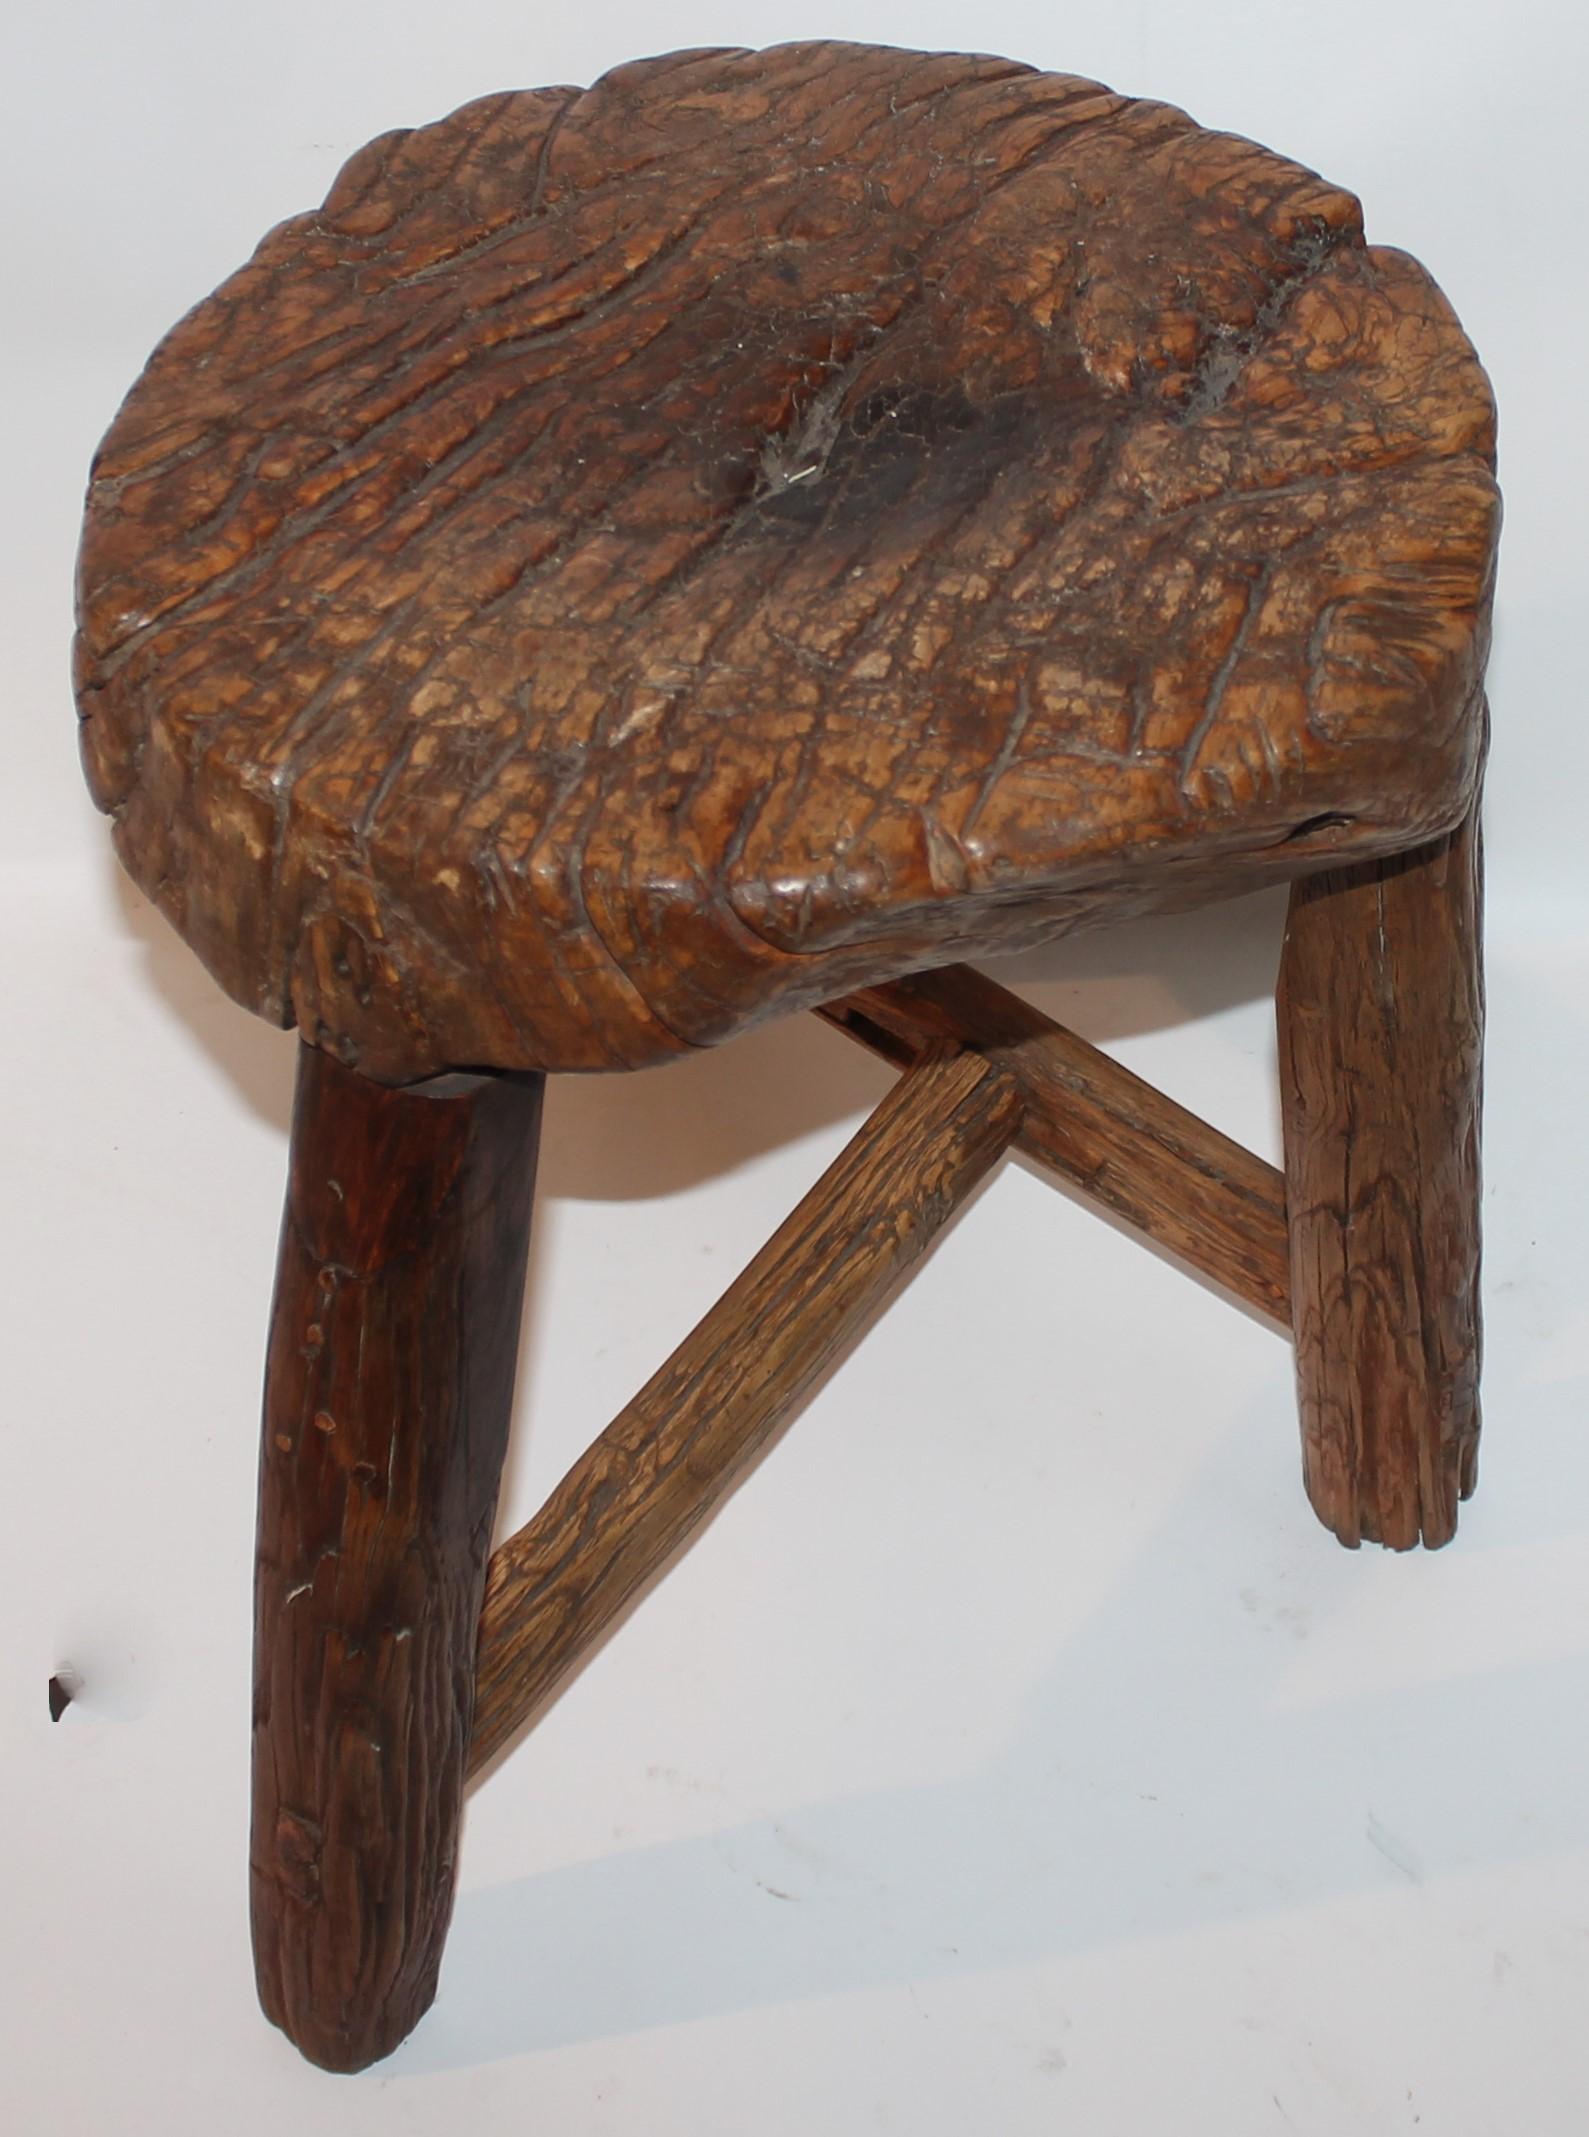 Beautiful early 18th C plank wood stool. Great in a ranch home, country home, on a porch.
Stool measures 19 wide x 16 deep.
Seat height measures 19 inches.